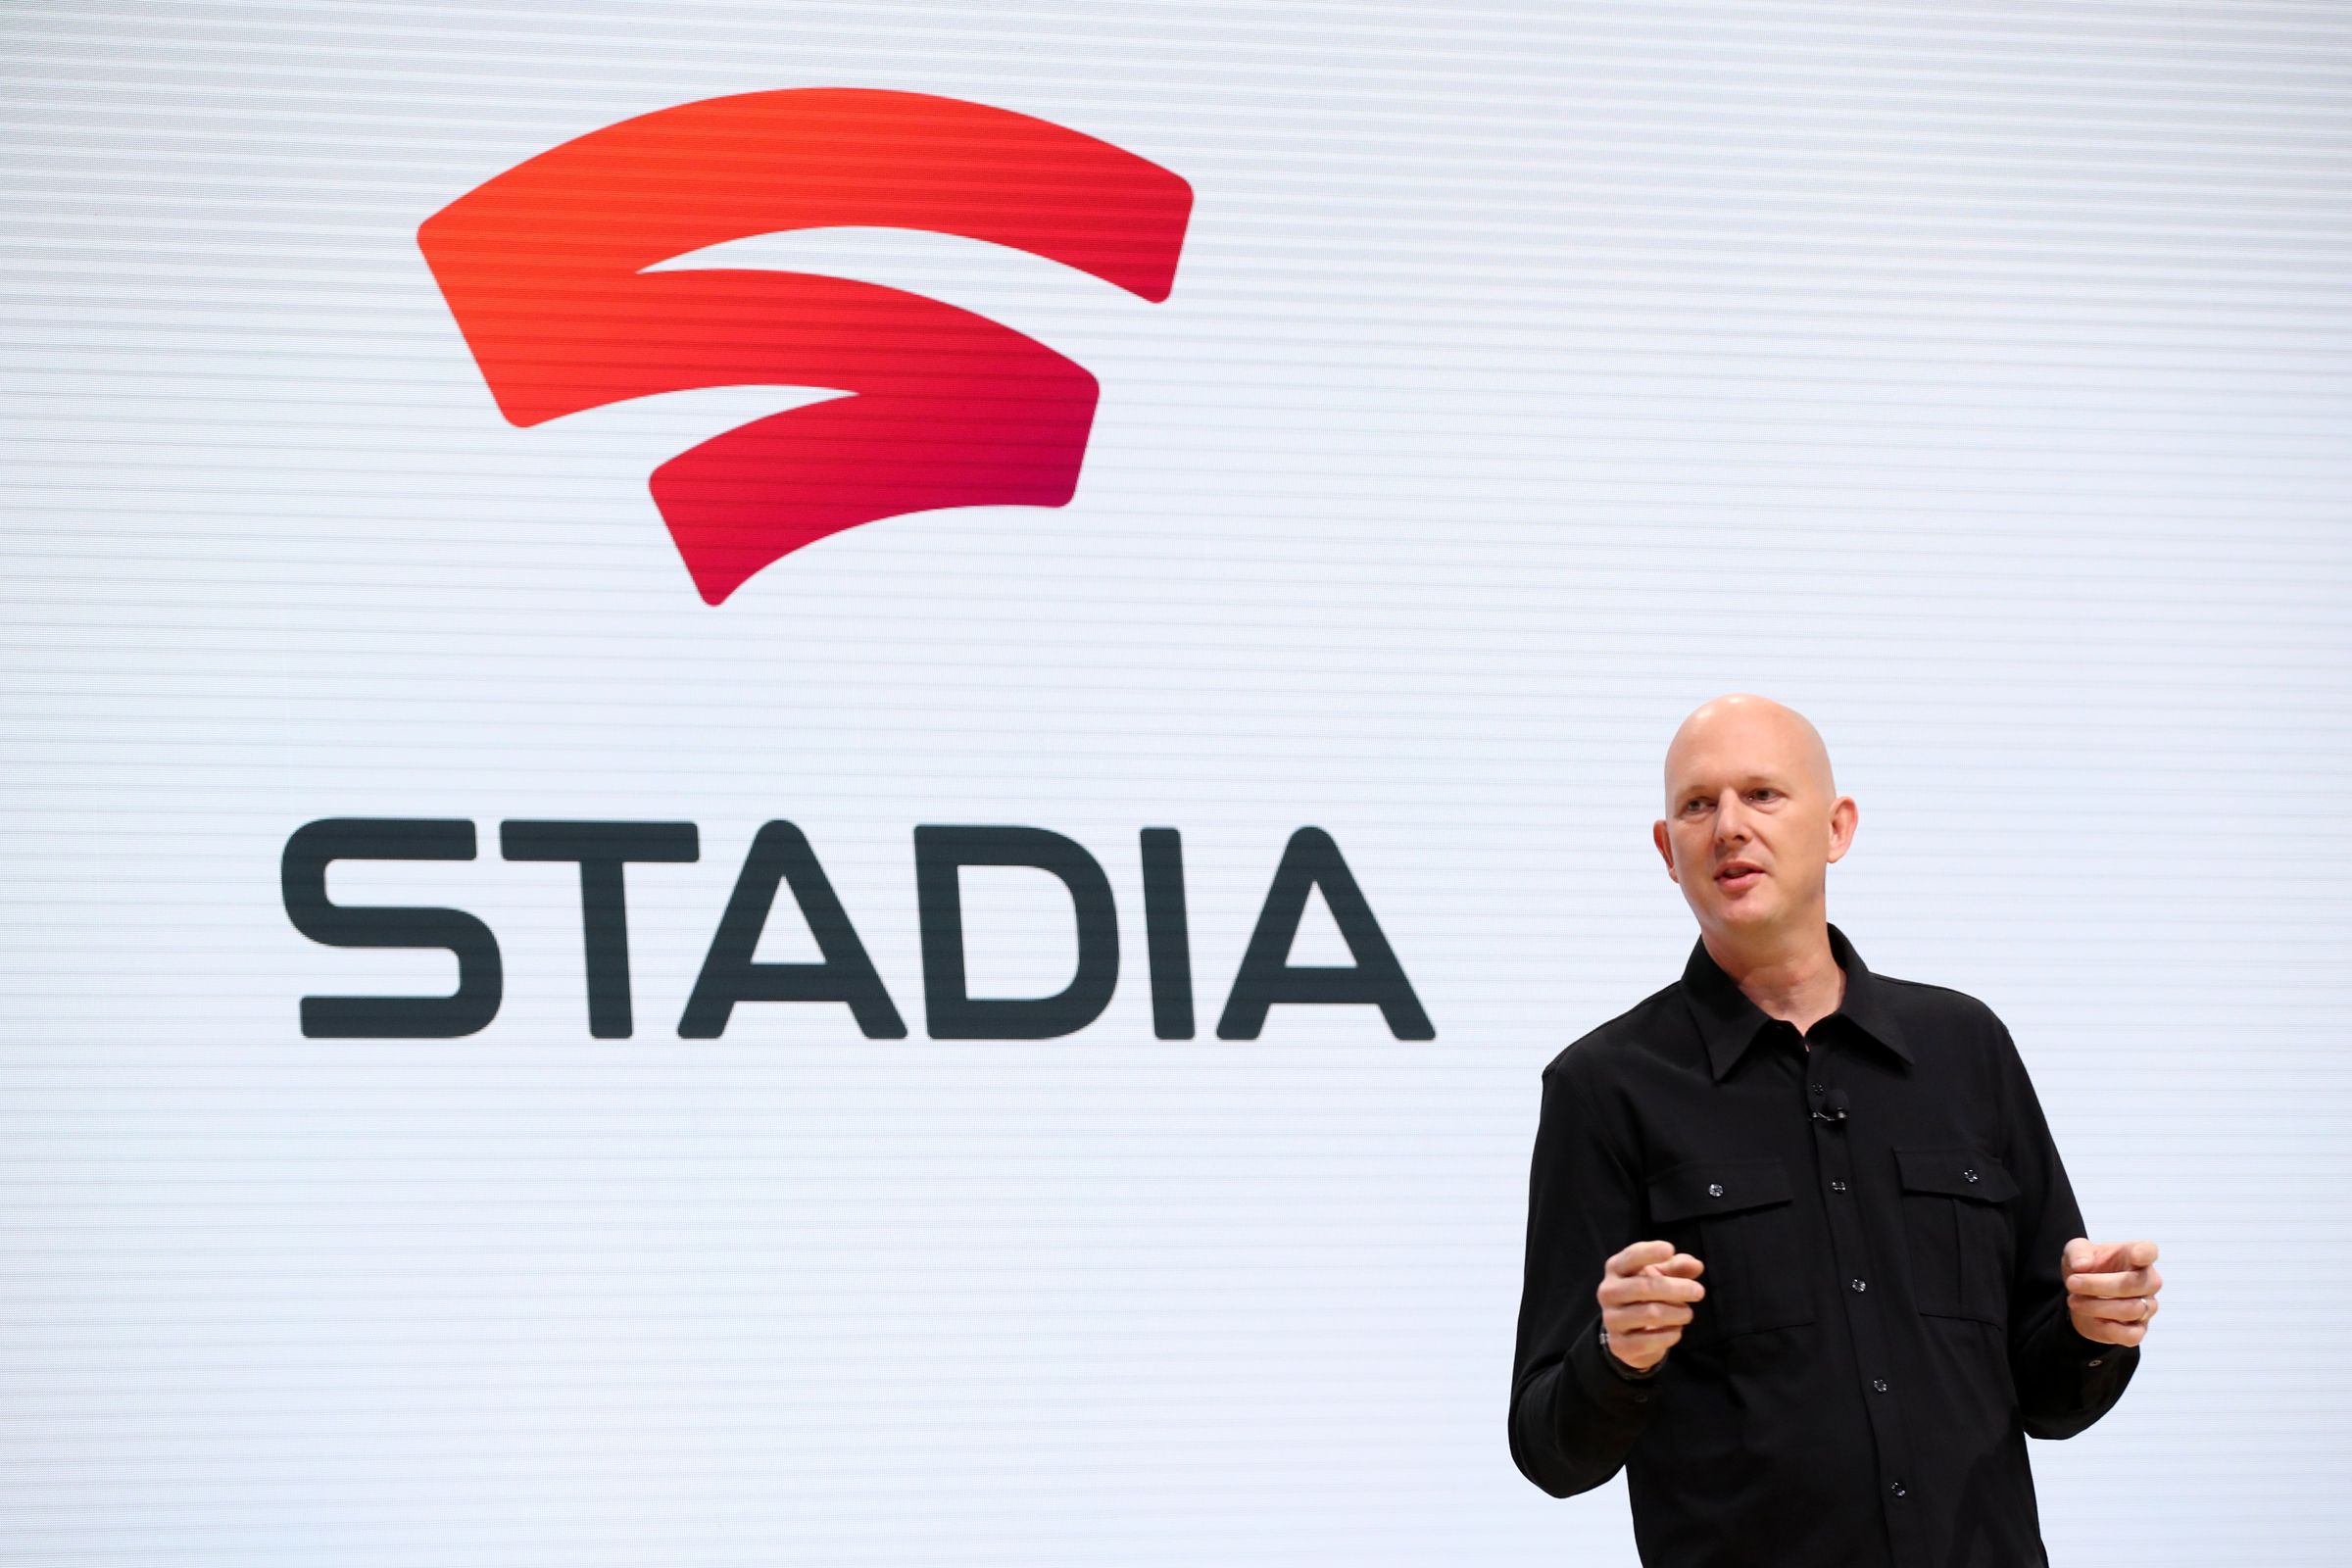 Google’s Phil Harrison is shown making an announcement onstage with a Stadia graphic behind him.